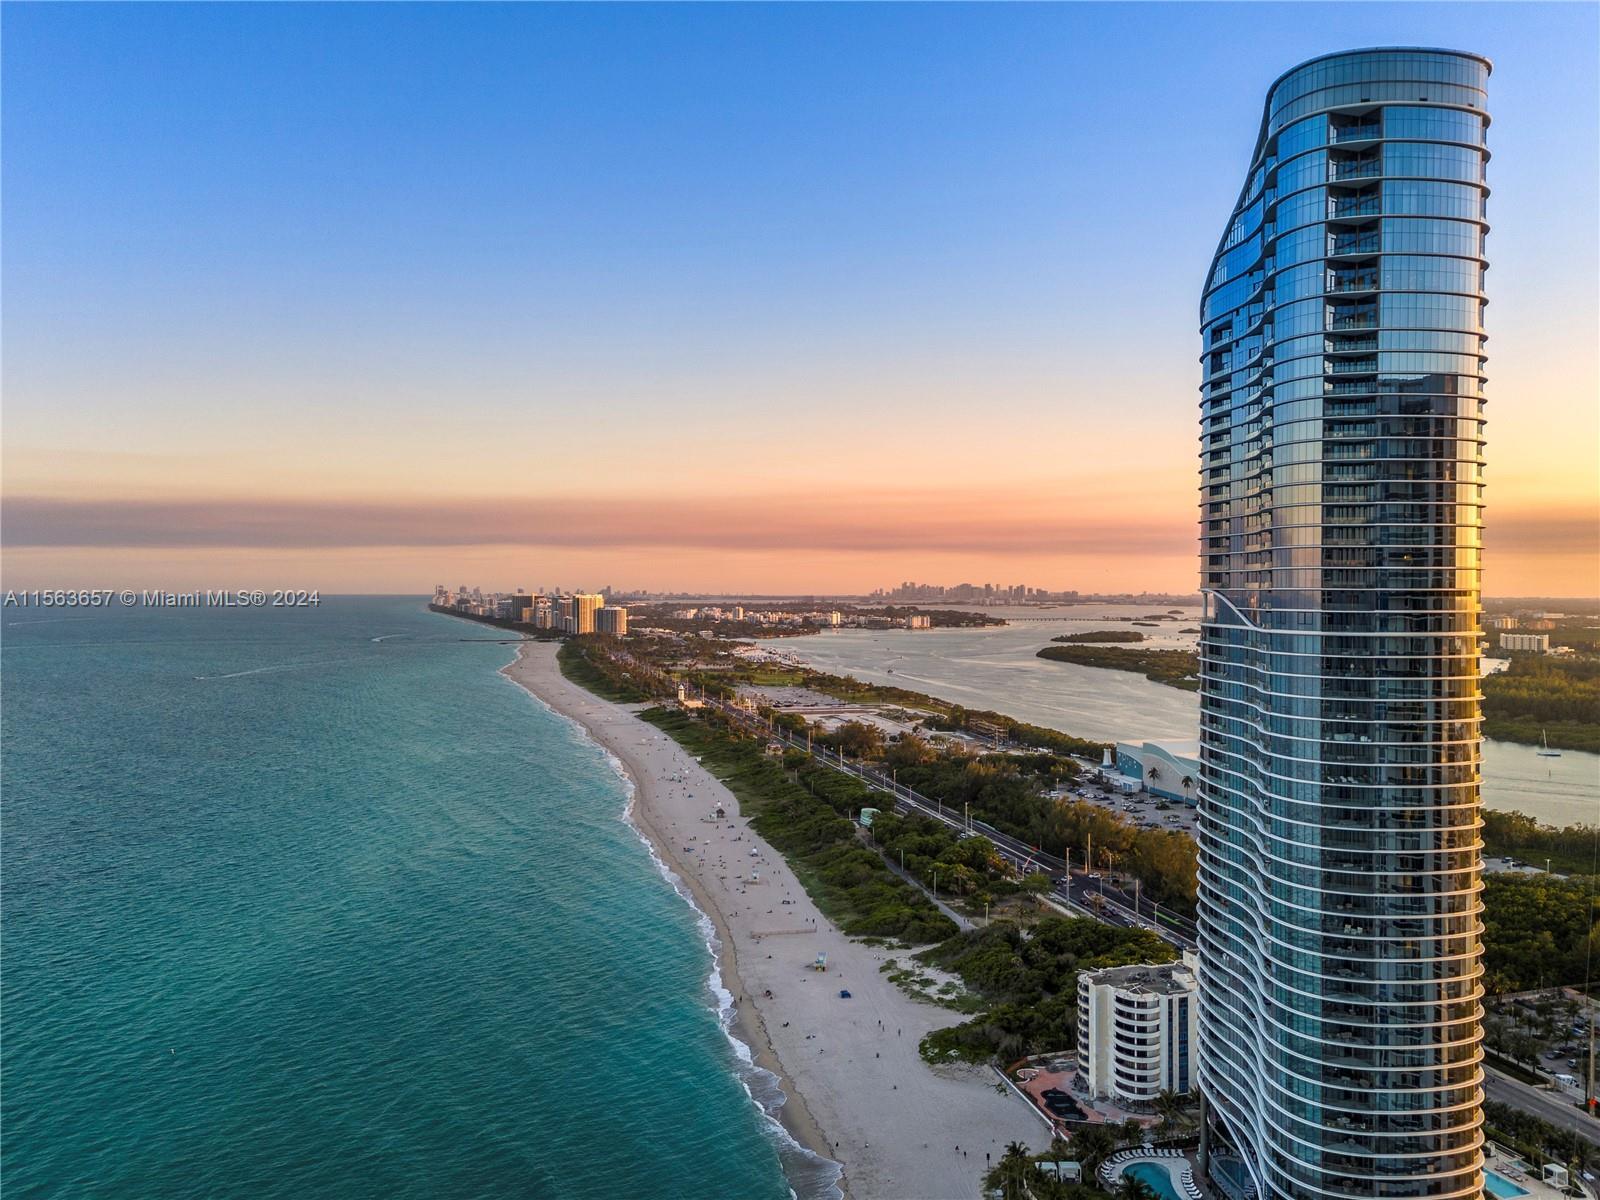 Junior Penthouse at Ritz-Carlton Sunny Isles.
Experience unparalleled luxury in this exquisite arch